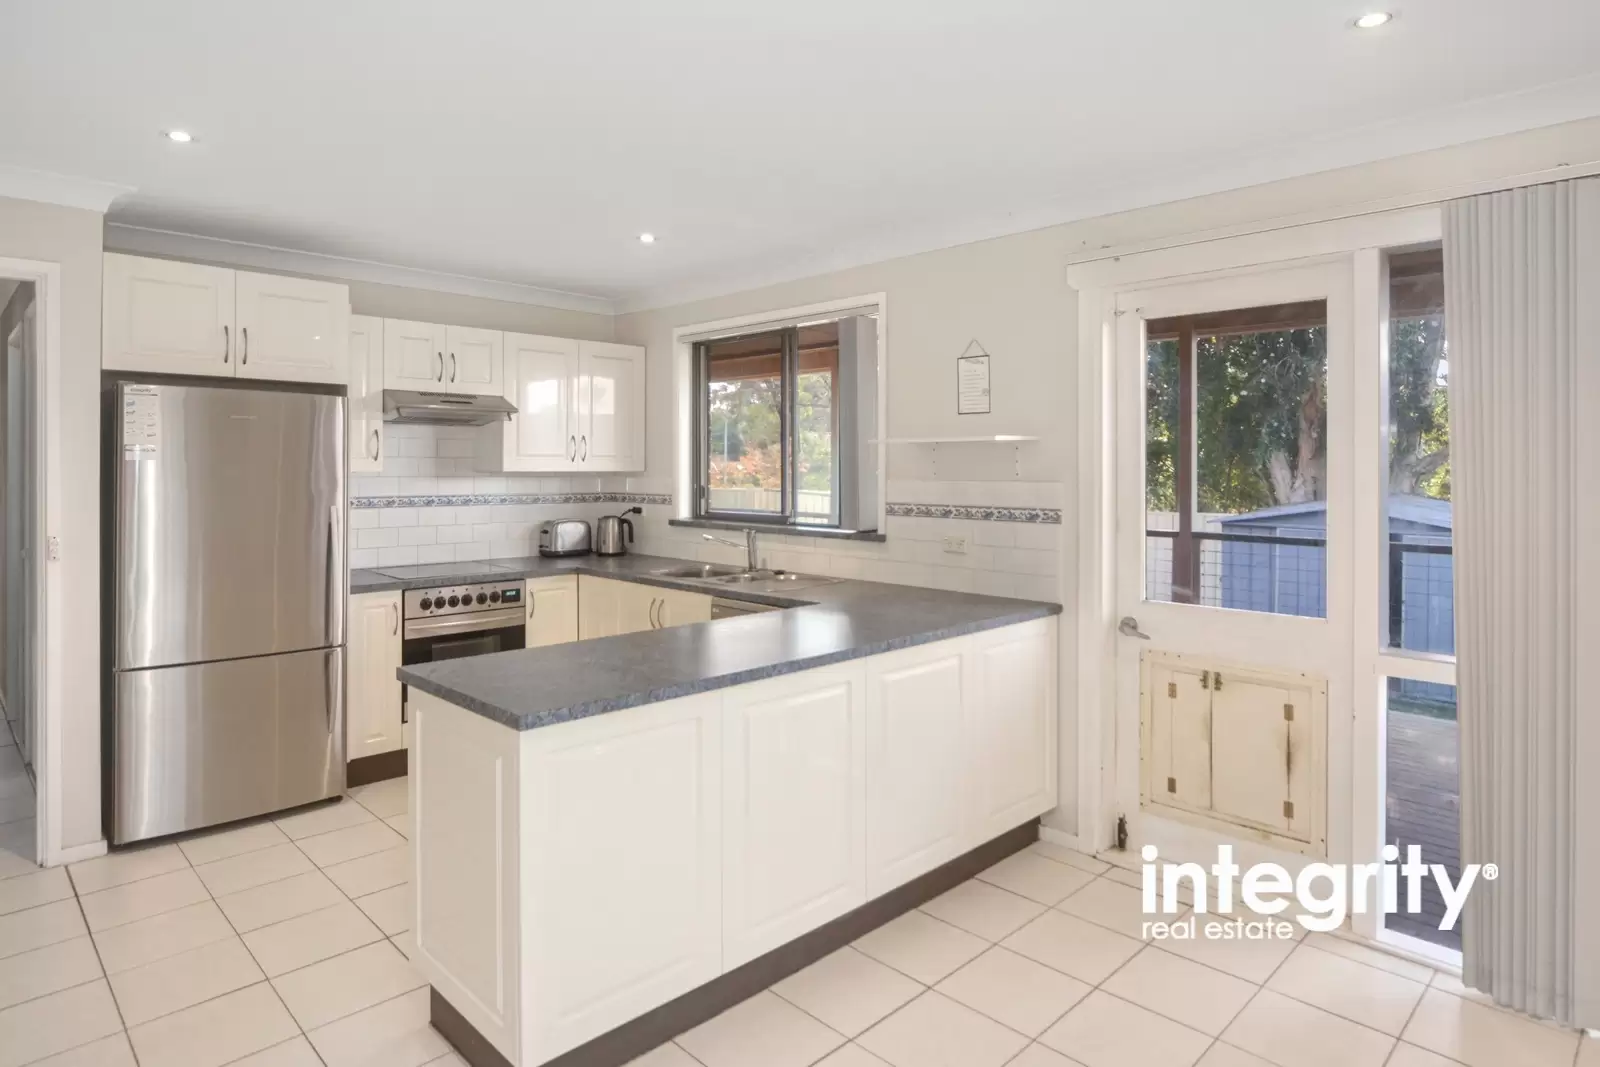 15 Yeovil Drive, Bomaderry Sold by Integrity Real Estate - image 3